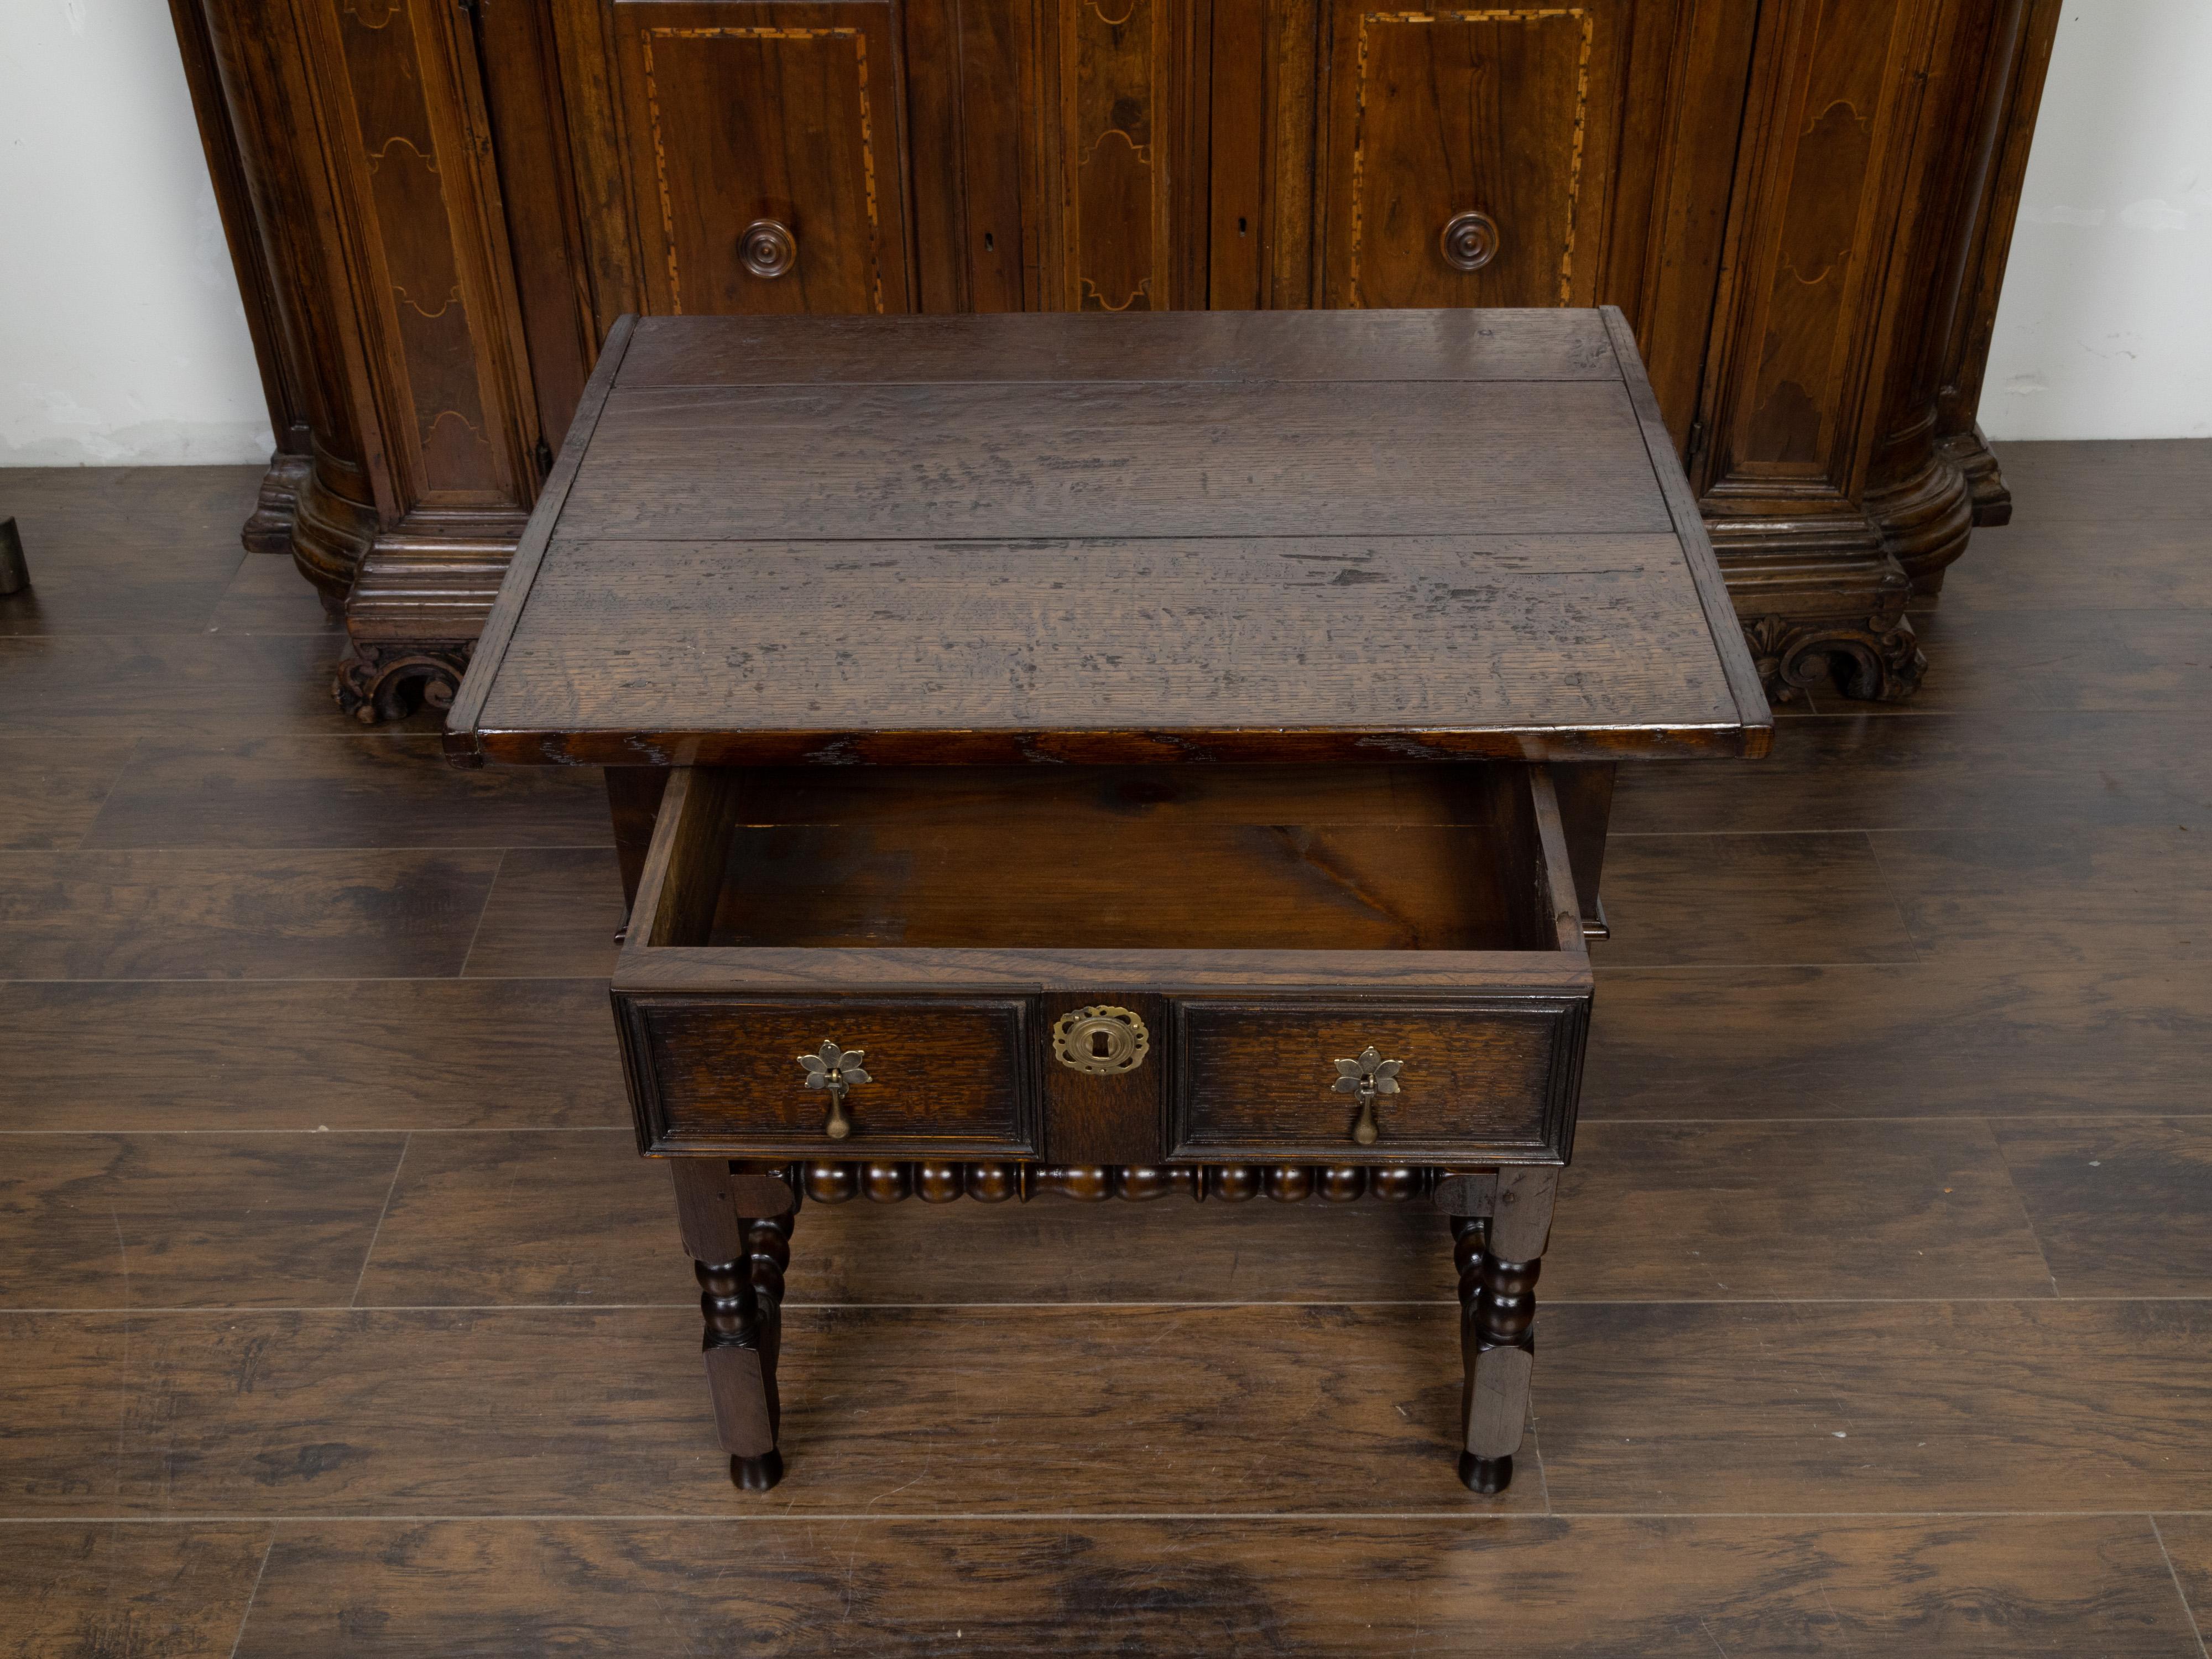 An English oak side table from the 19th century, with single drawer and bobbin accents. Created in England during the 19th century, this oak side table features a rectangular planked top sitting above a single drawer with molded panels and brass